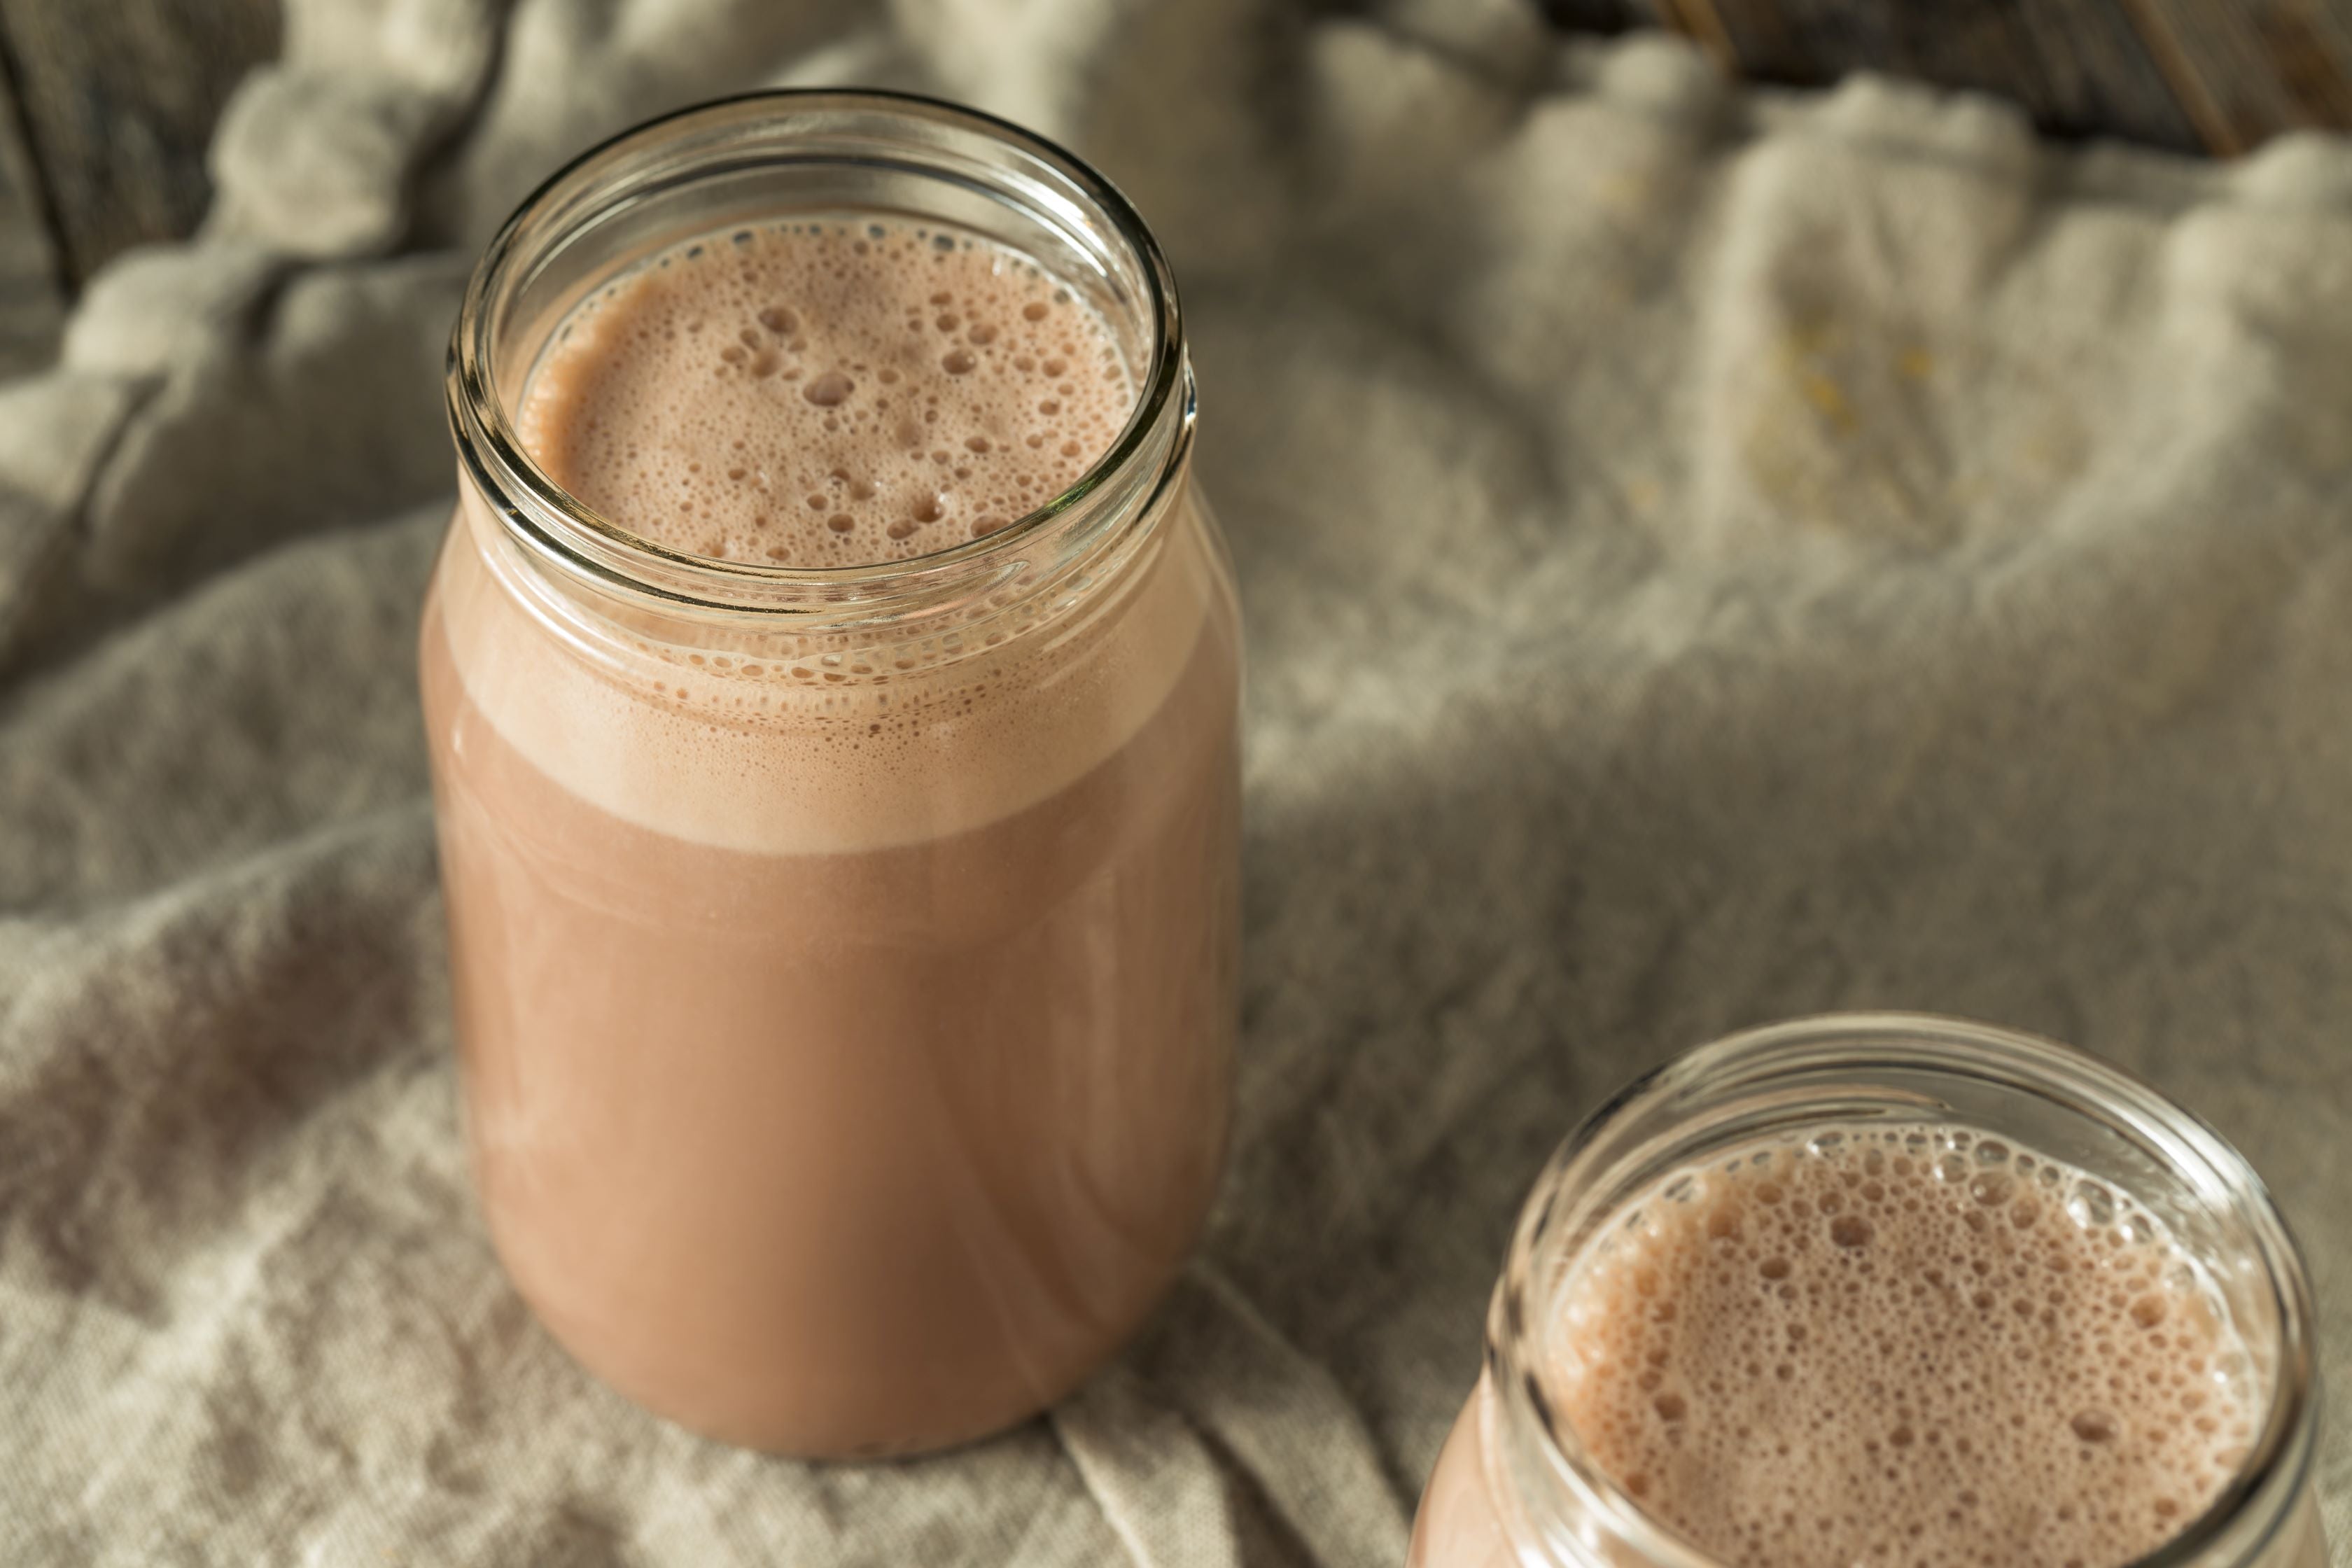 Glass jars filled with a chocolate milkshake in front of a neutral background.